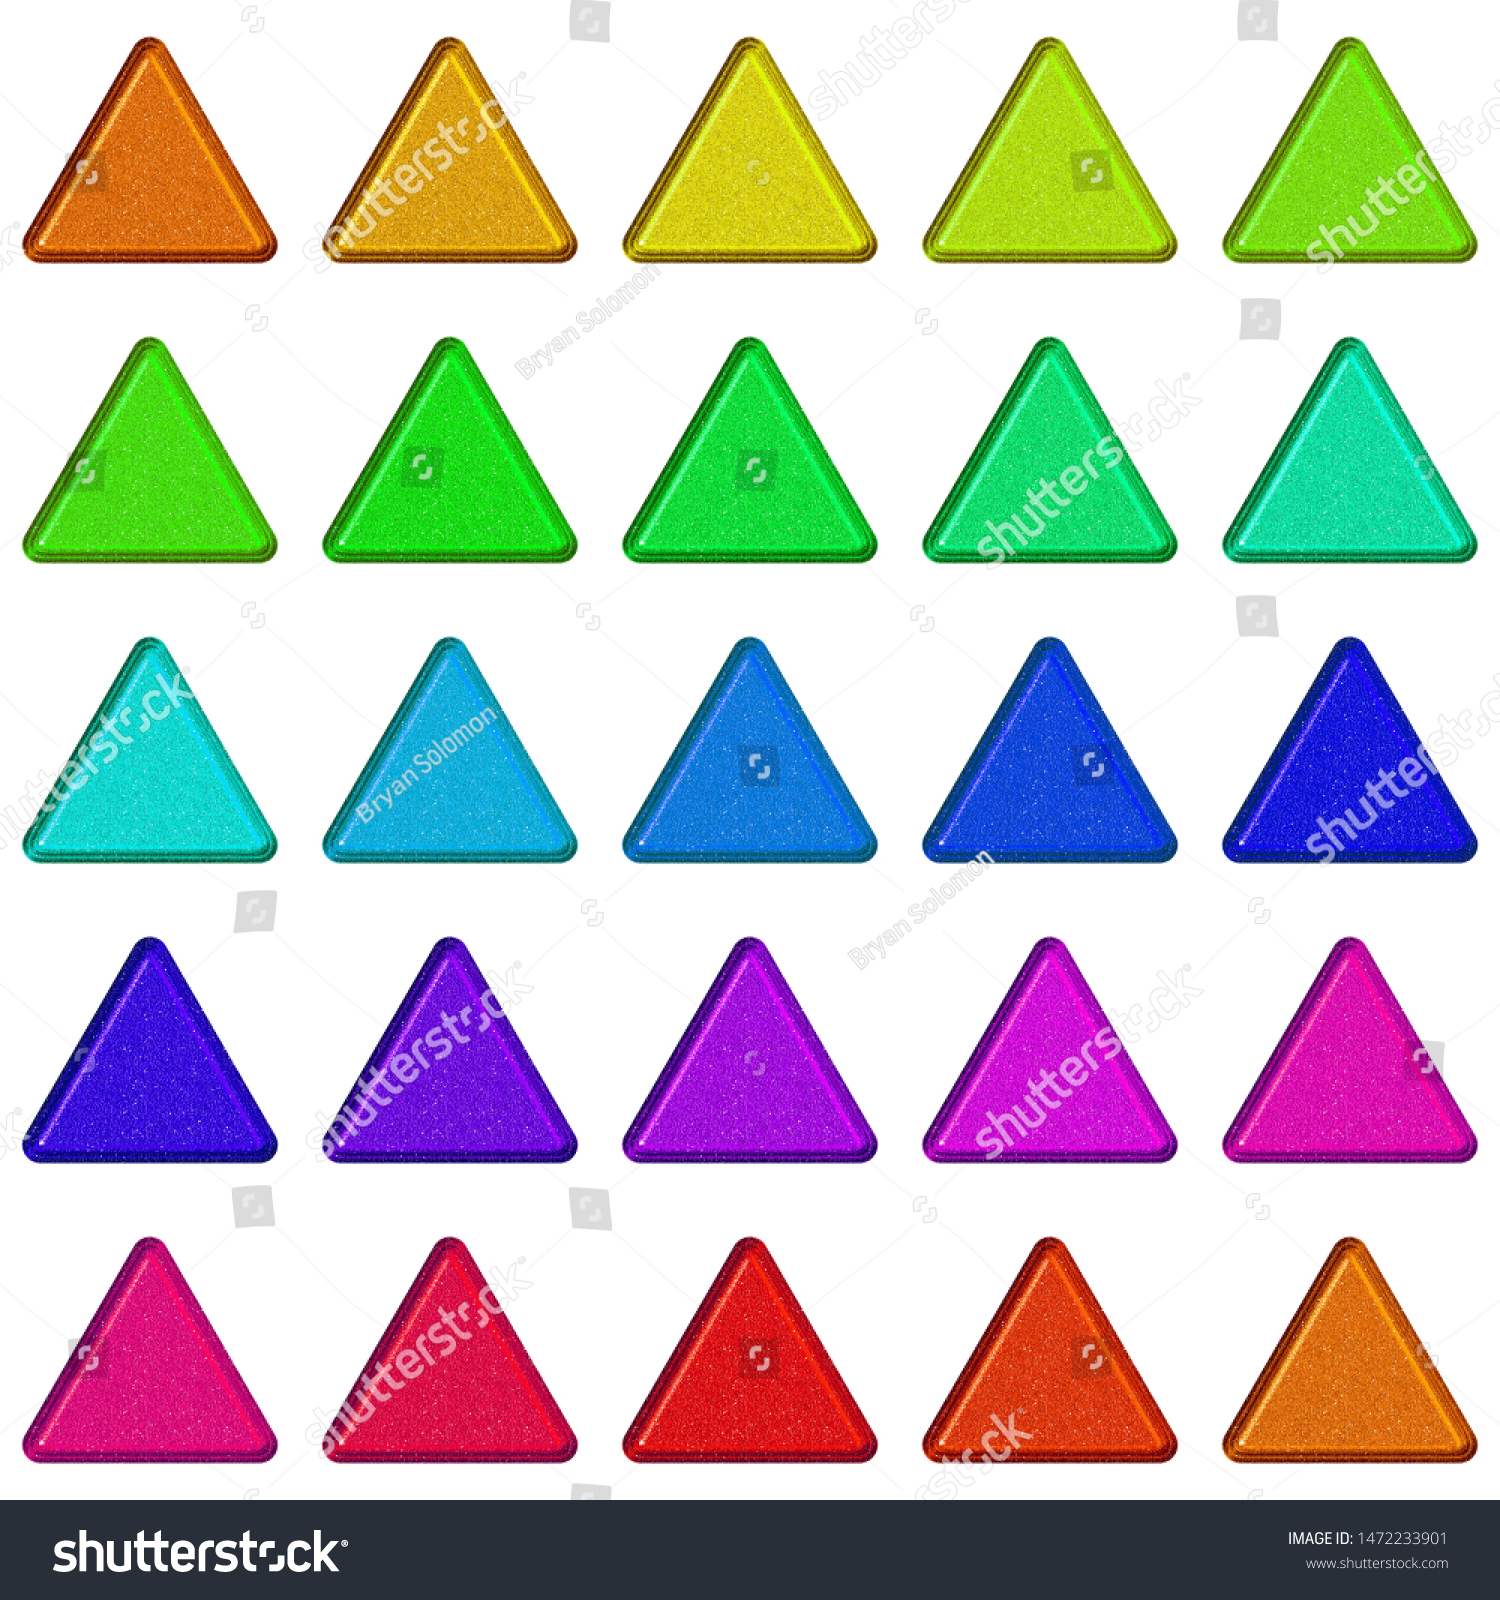 Triangle with multiple colors